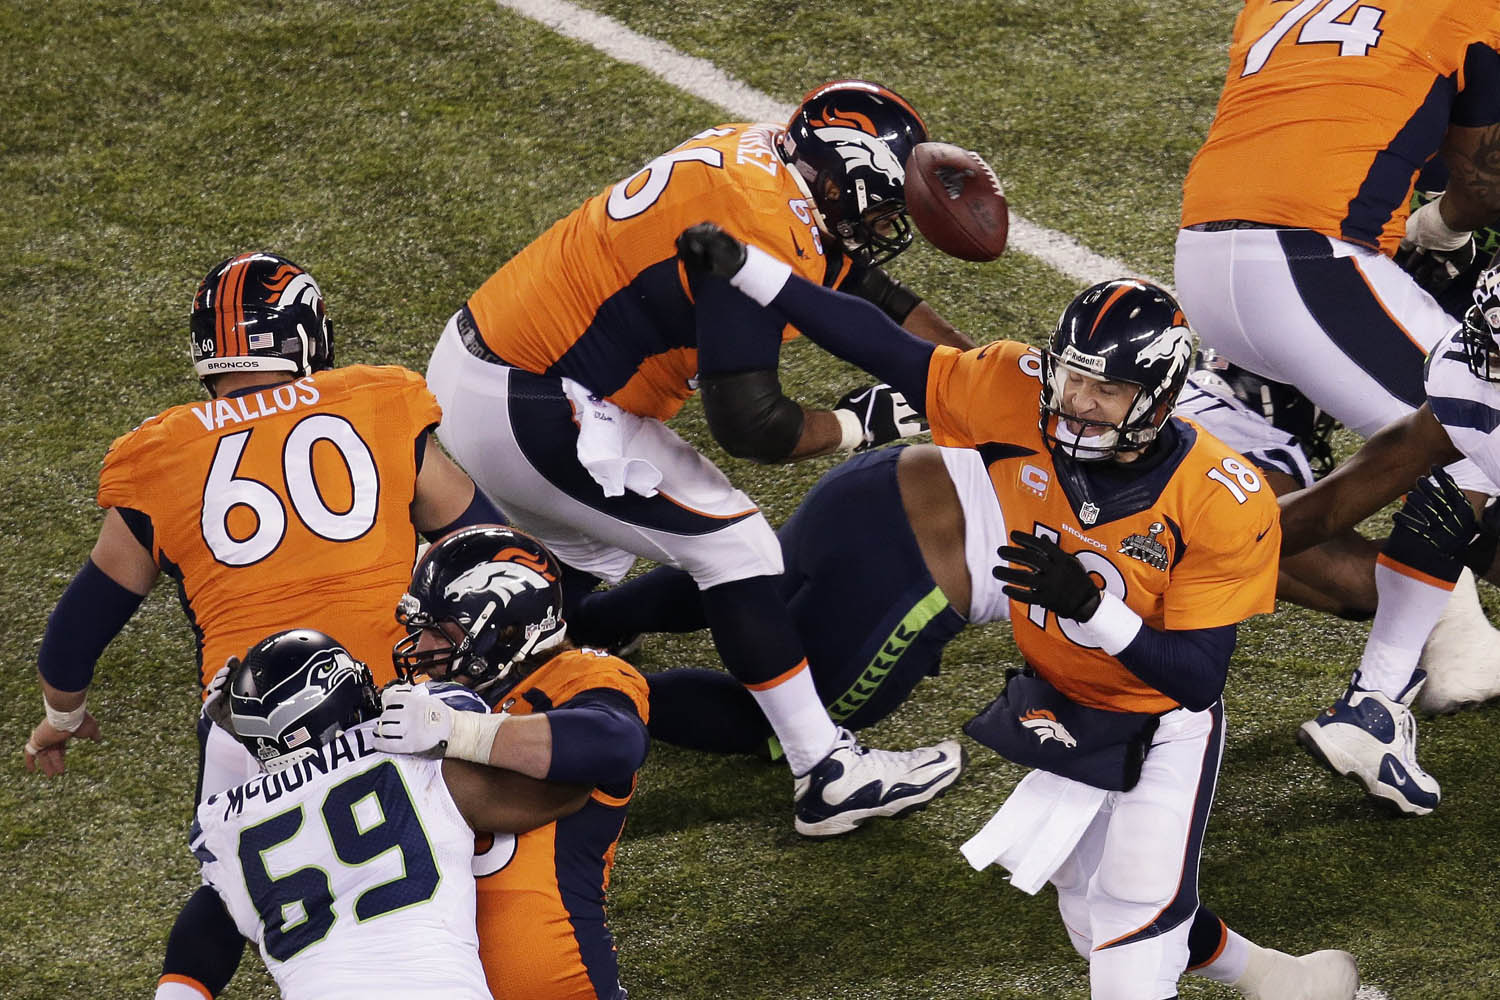 Feb. 2, 2014. Quarterback Peyton Manning of the Denver Broncos has a pass blocked by the Seattle Seahawks during Super Bowl XLVIII at MetLife Stadium in East Rutherford, N.J.